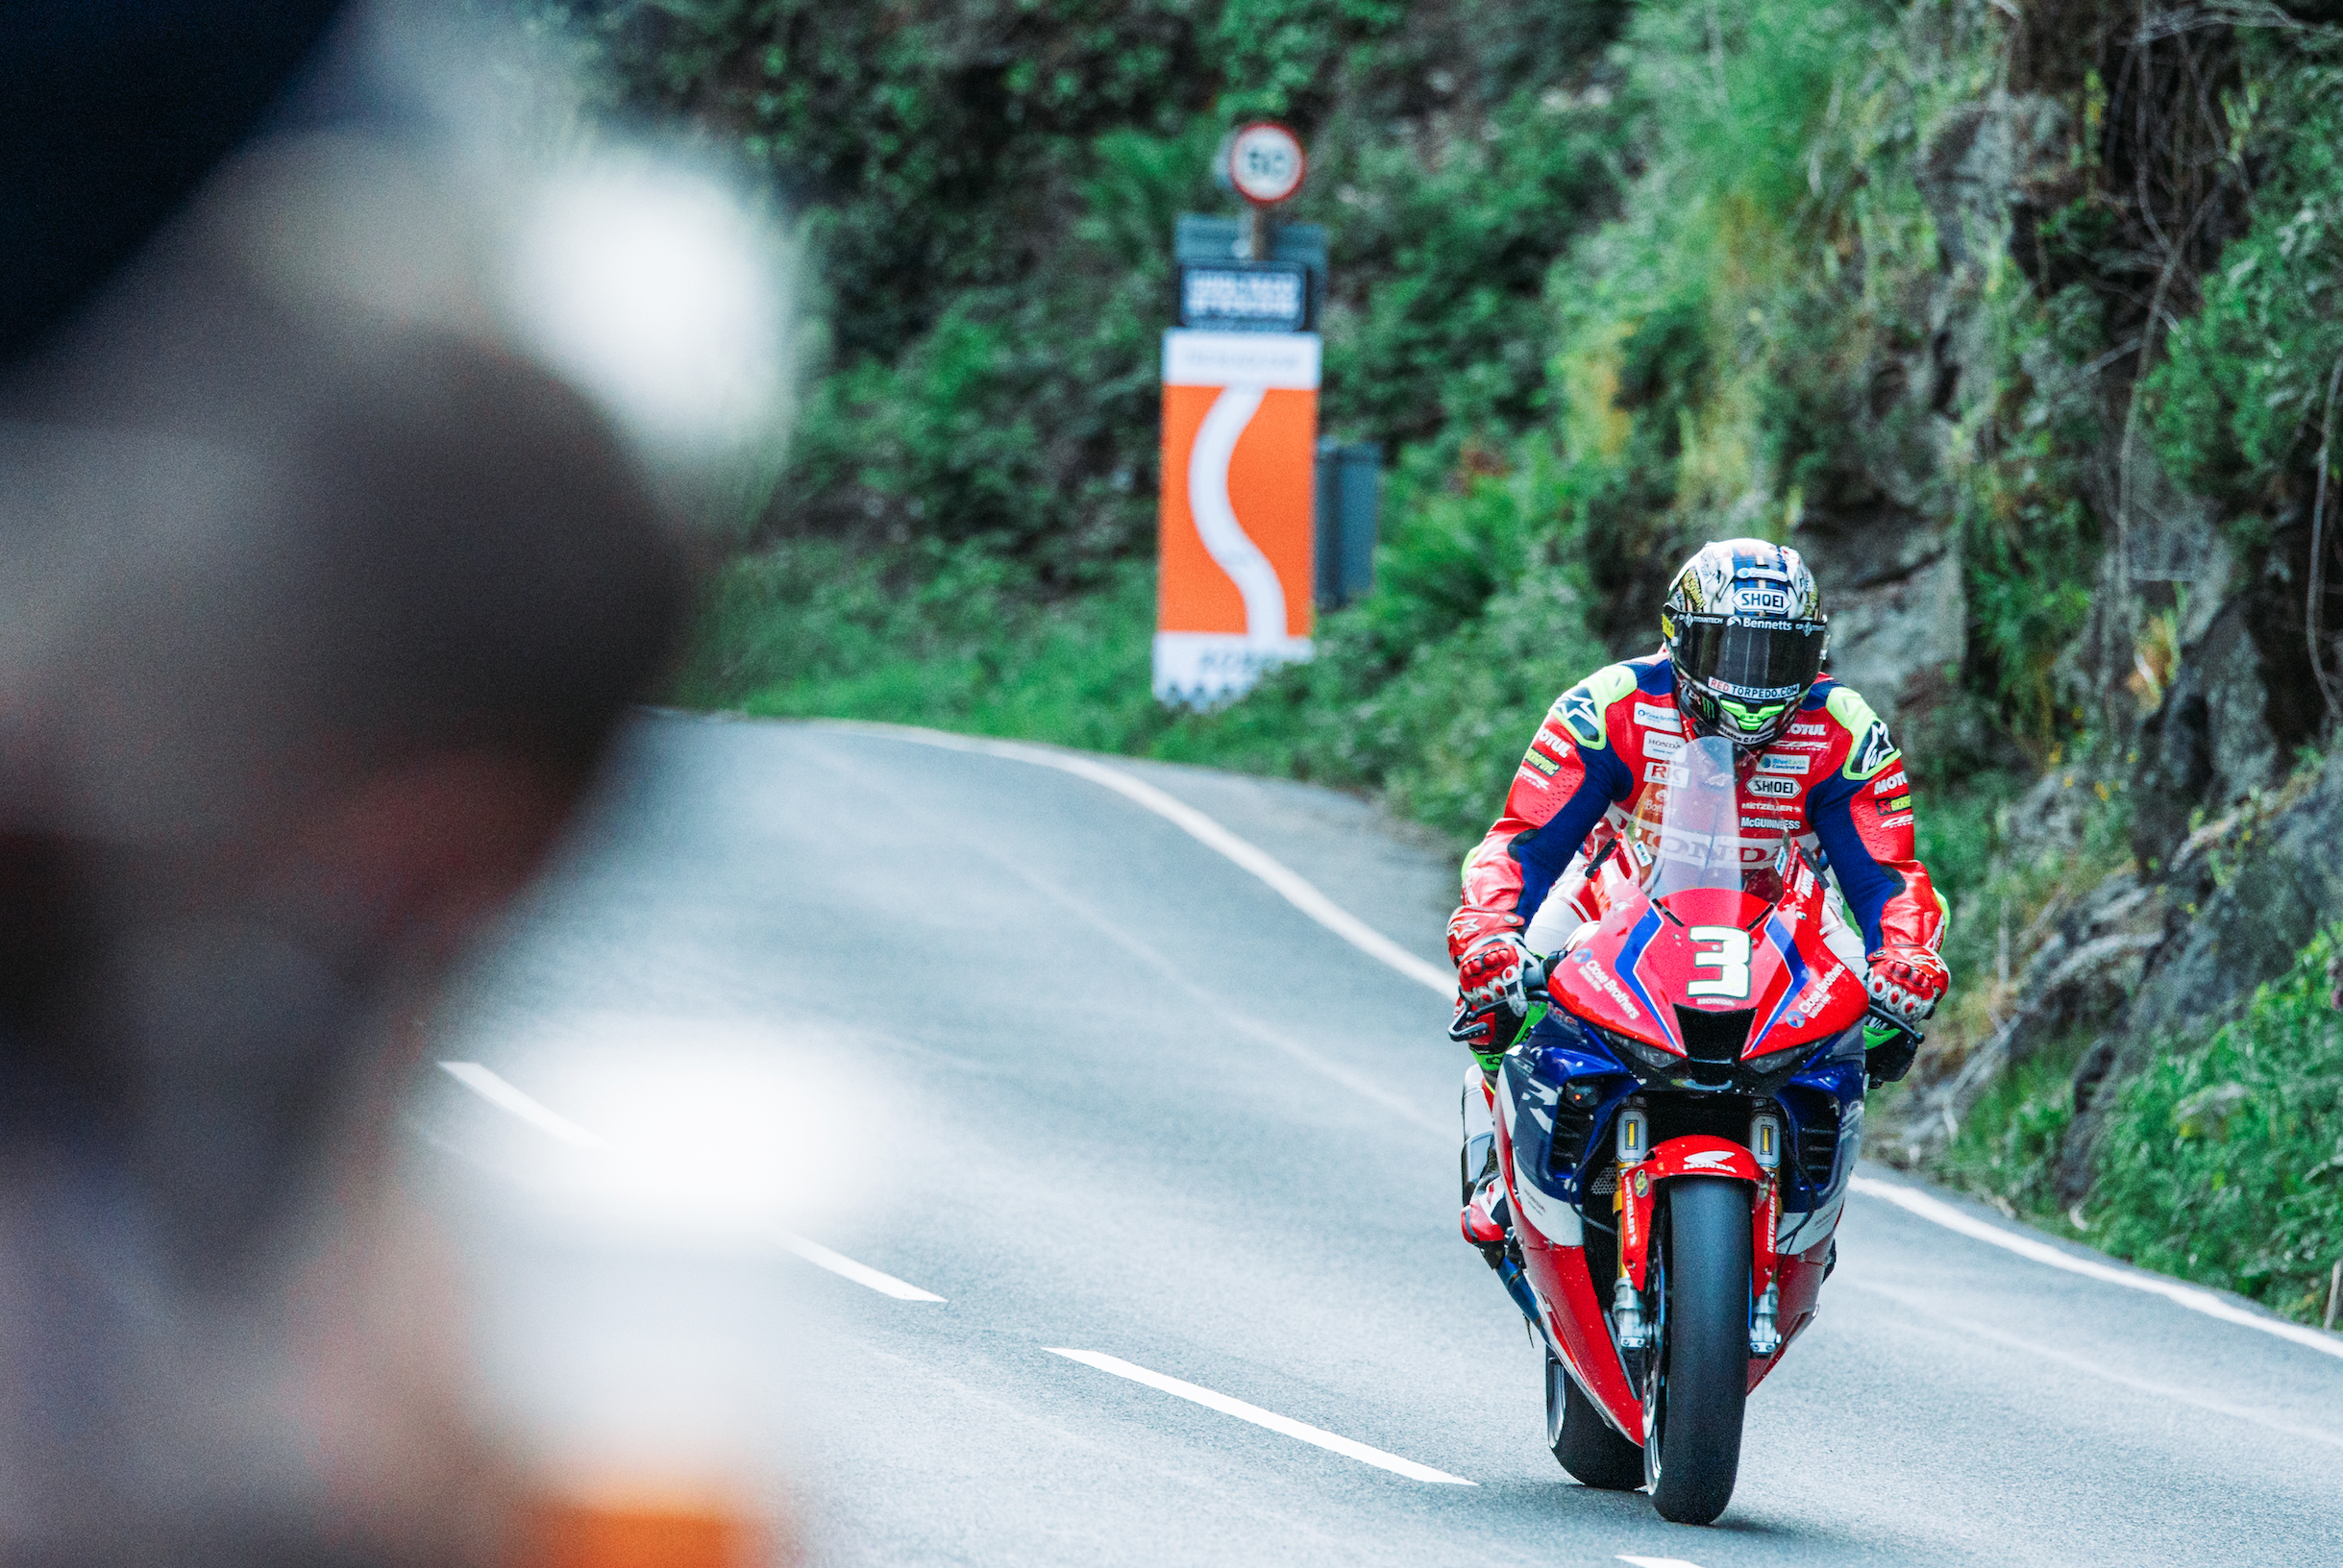 Load video: The Best place to watch the Isle of Man TT 